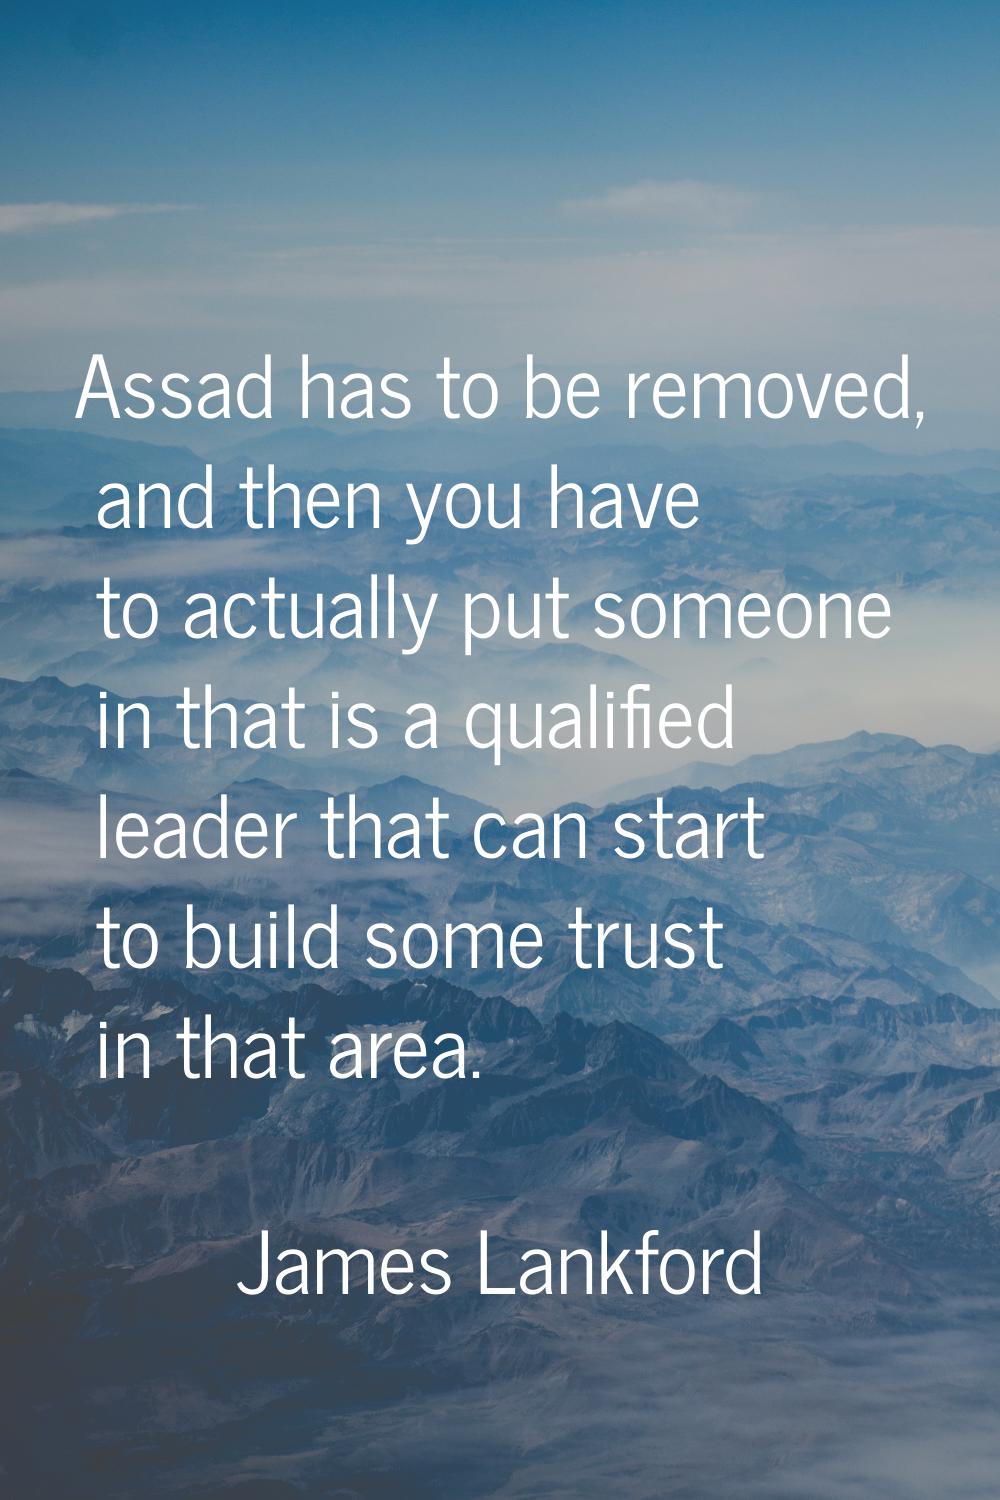 Assad has to be removed, and then you have to actually put someone in that is a qualified leader th